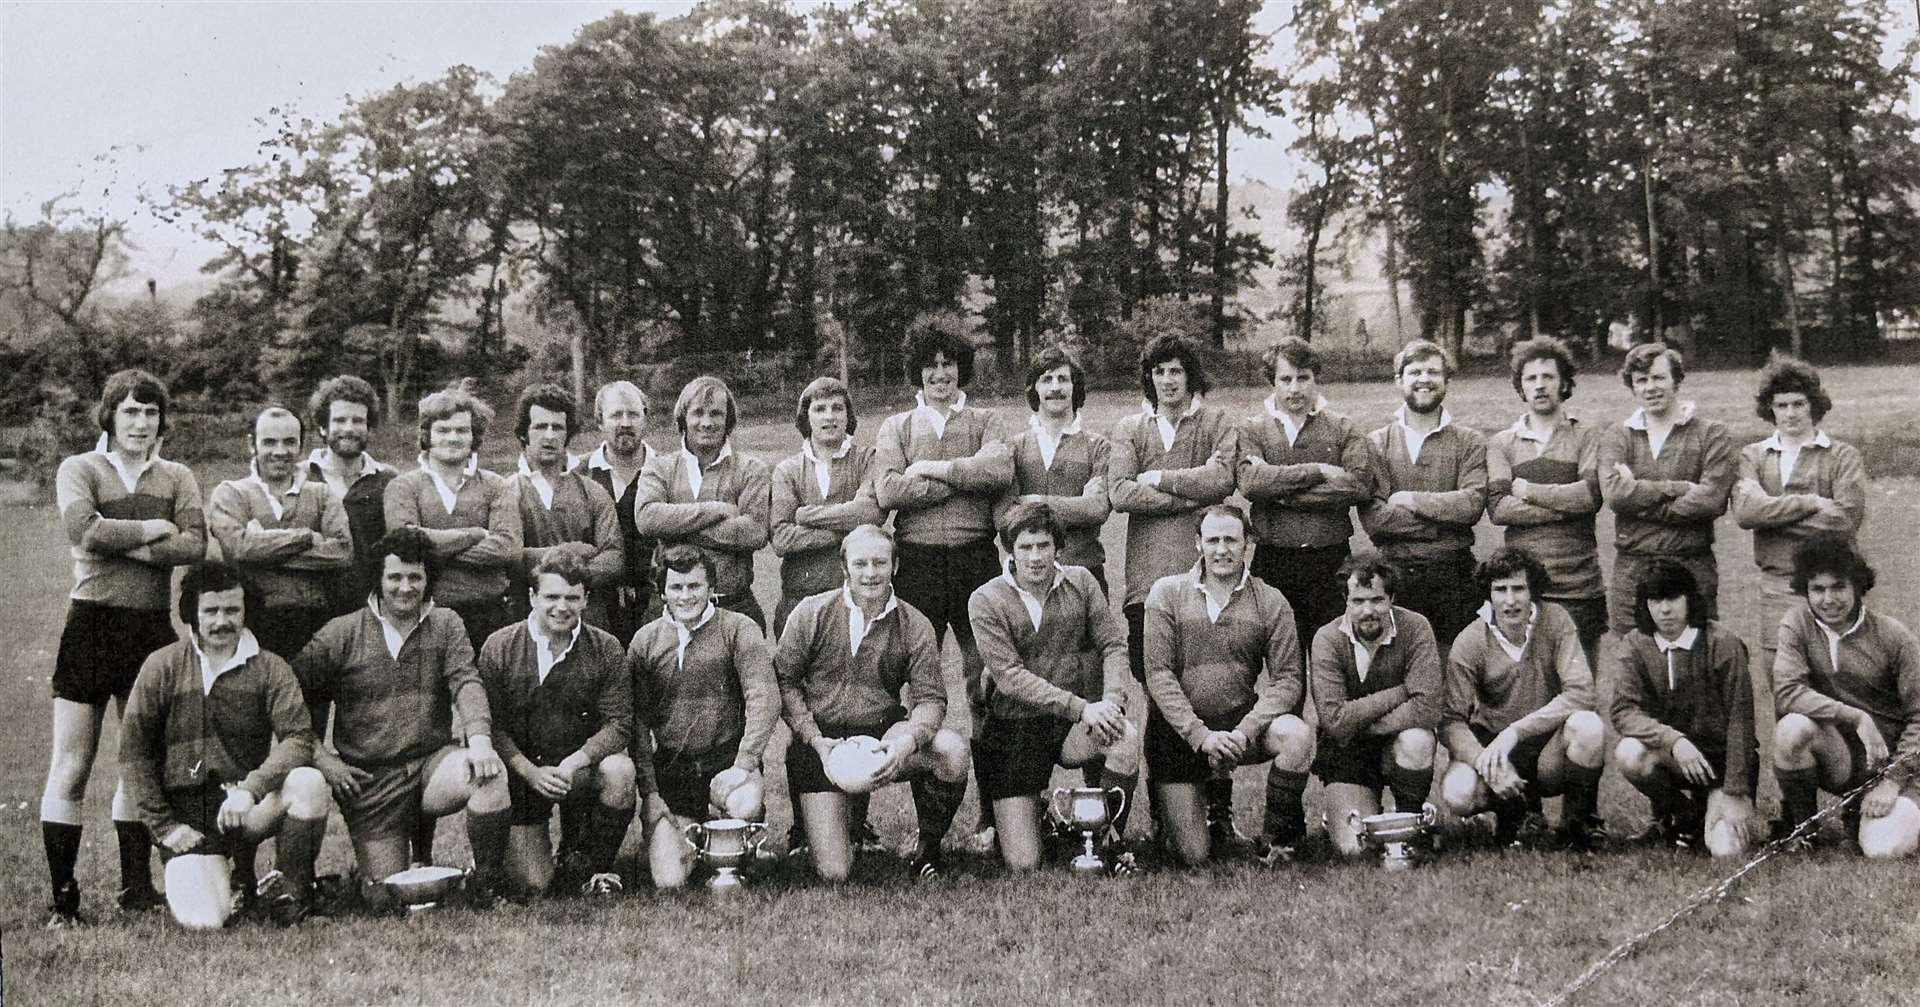 Highland RFC players from the mid 1970s.